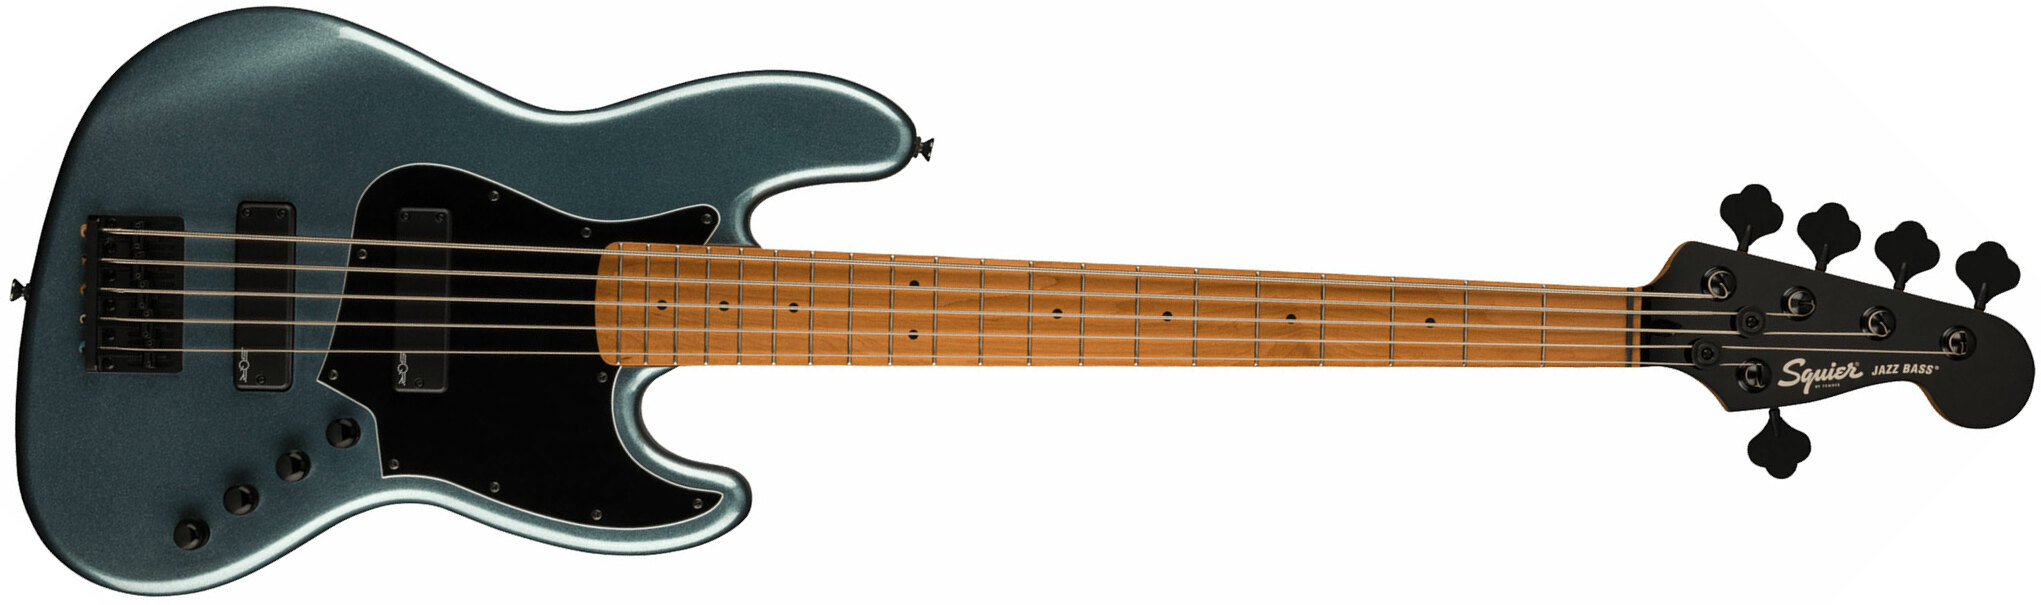 Squier Jazz Bass V Contemporary Active Hh 5c Mn - Gunmetal Metallic - Solid body electric bass - Main picture